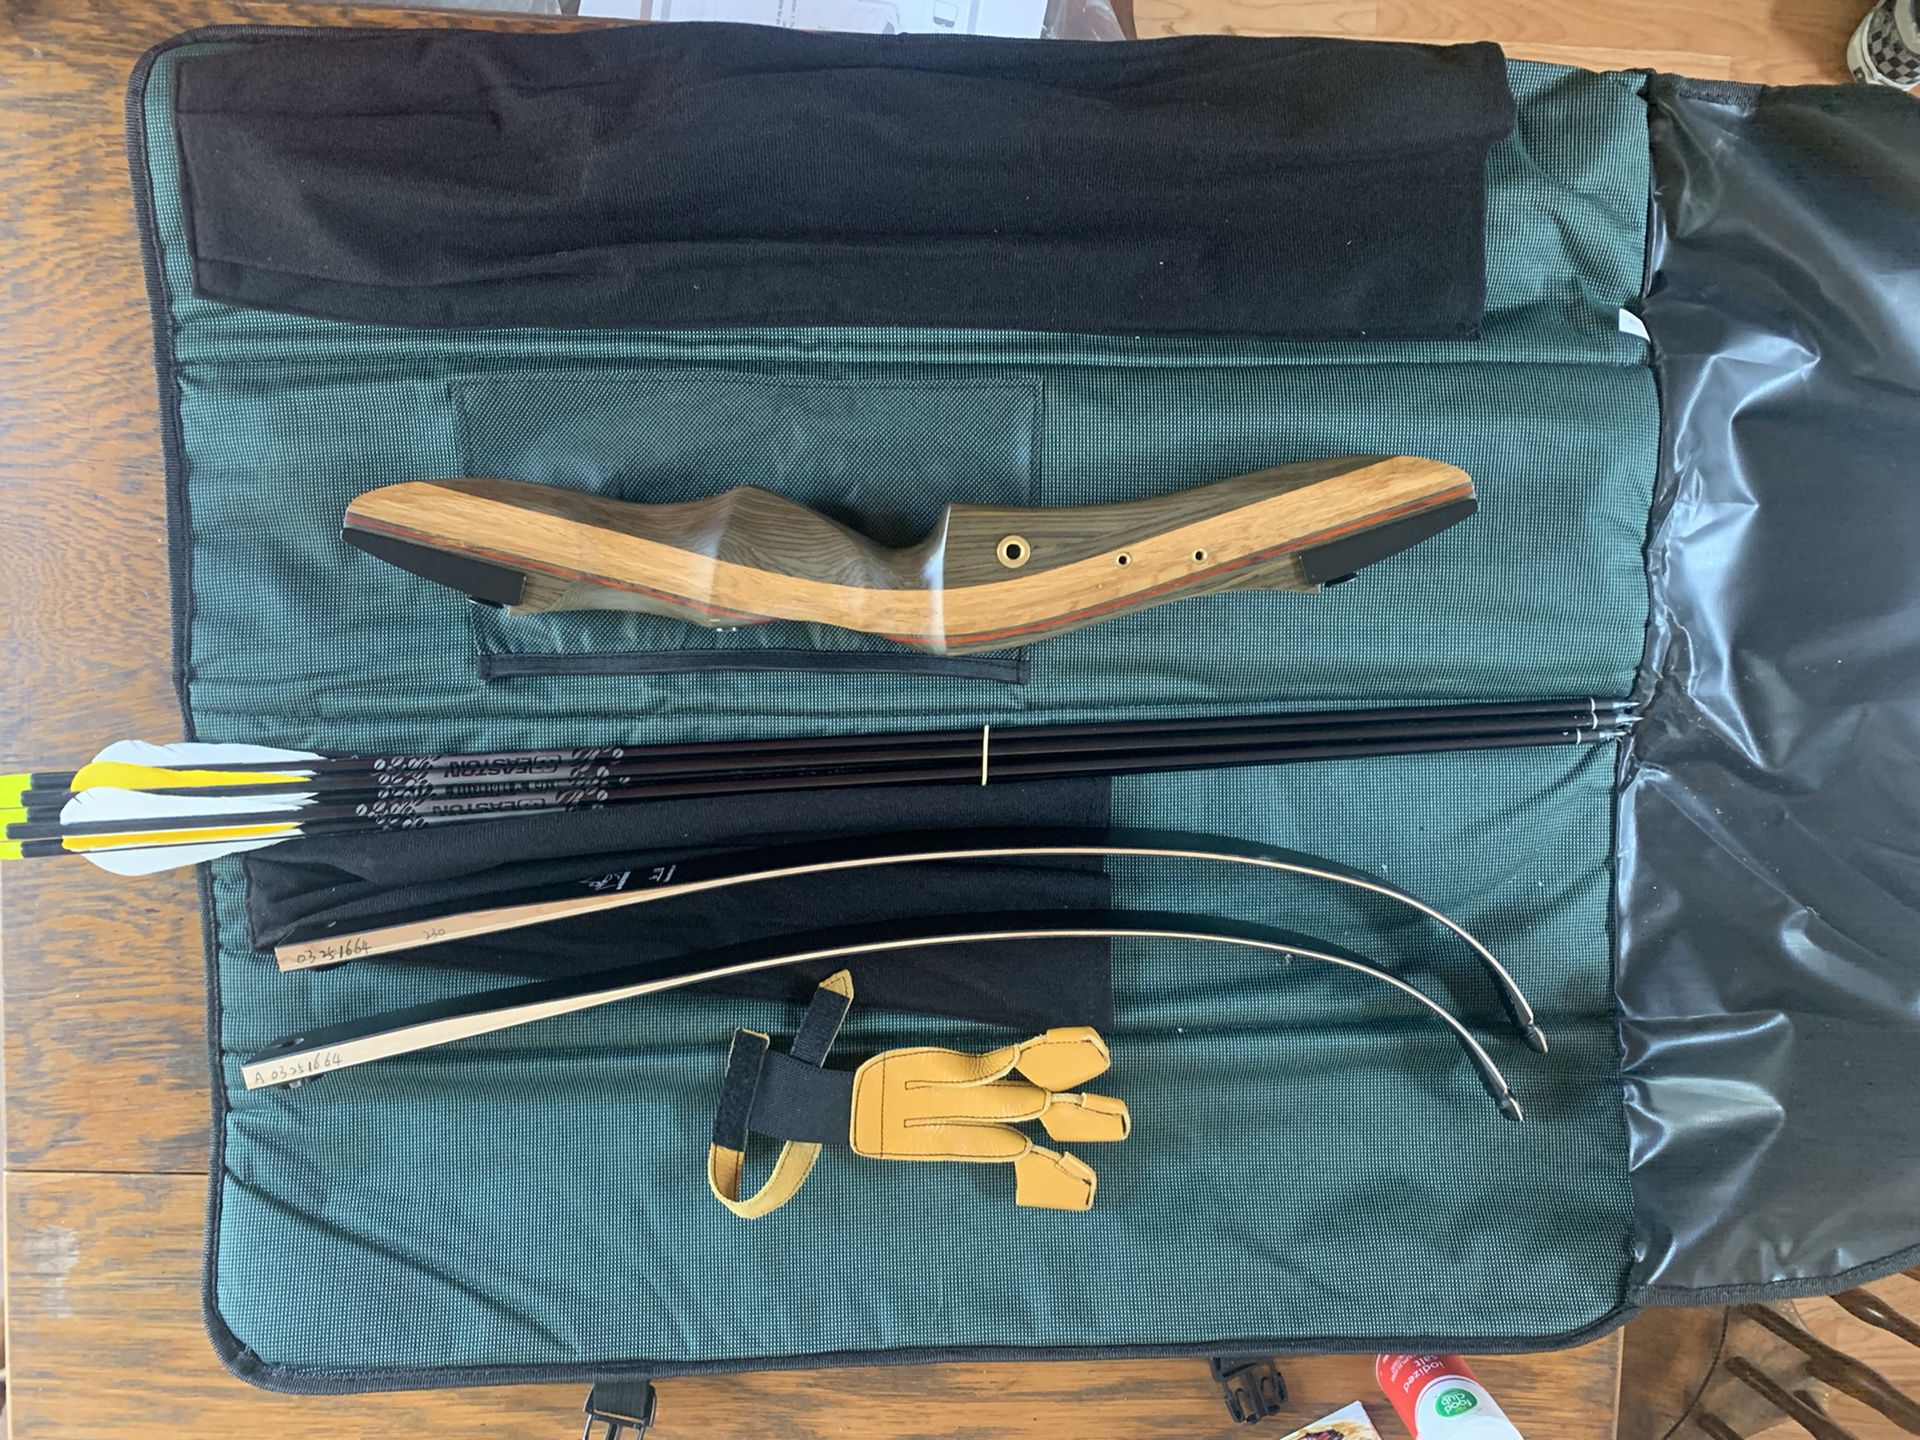 30 lb Recurve Bow and kit.